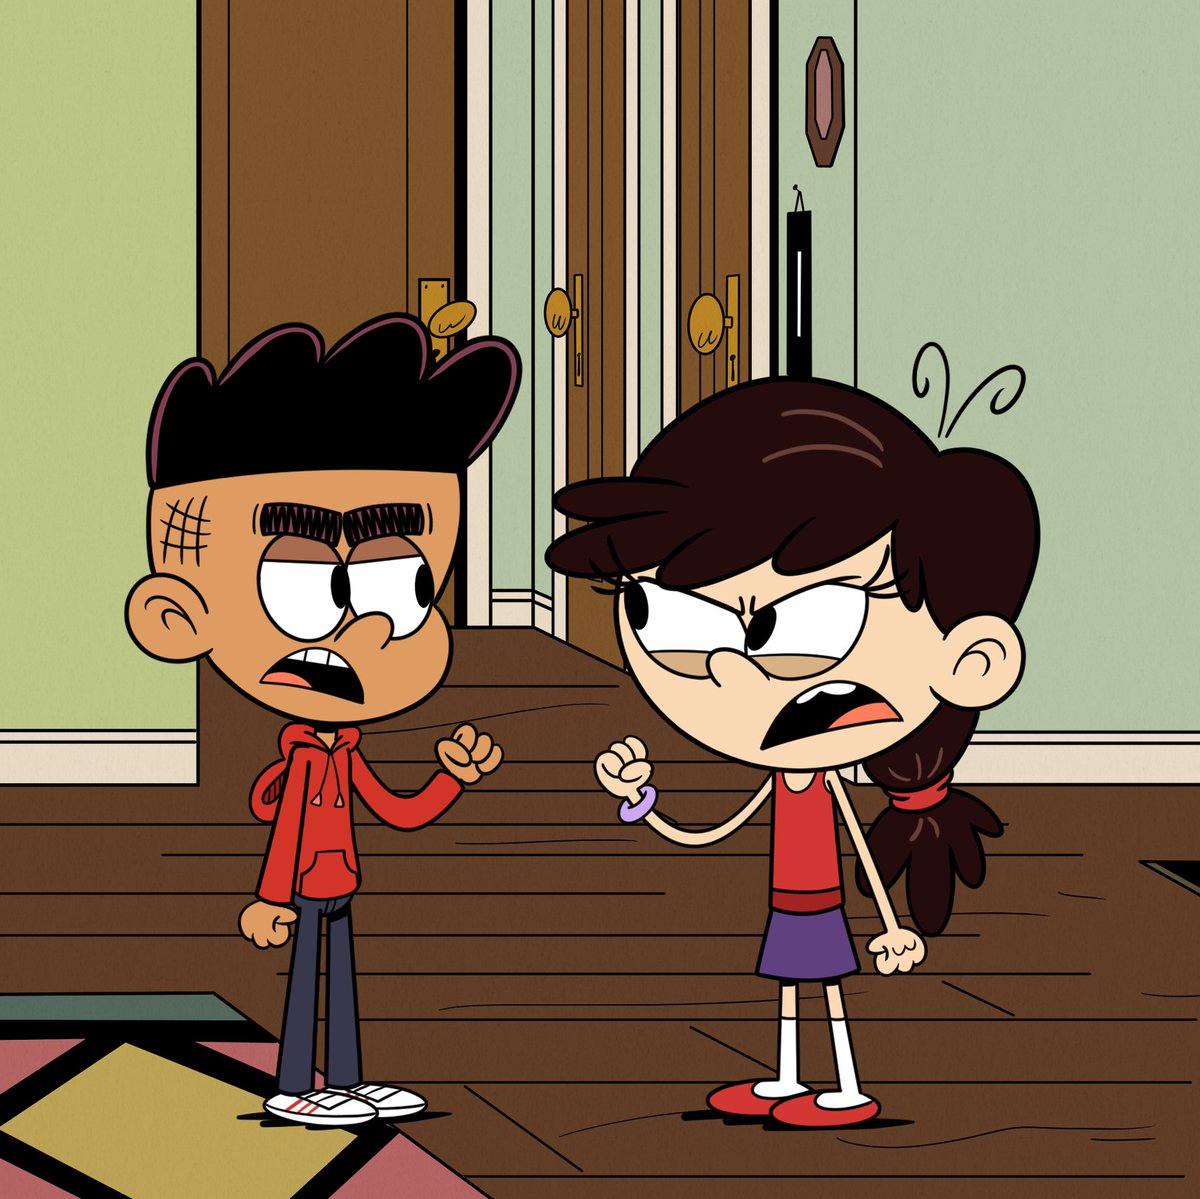 Artwork made by artist @AlejinZX and based on an image made by @Carladelaide12. Carl and Adelaide are having an argument; don't worry, they will make up later. #TheLoudHouse #TheCasagrandes #CarlCasagrande #AdelaideChang